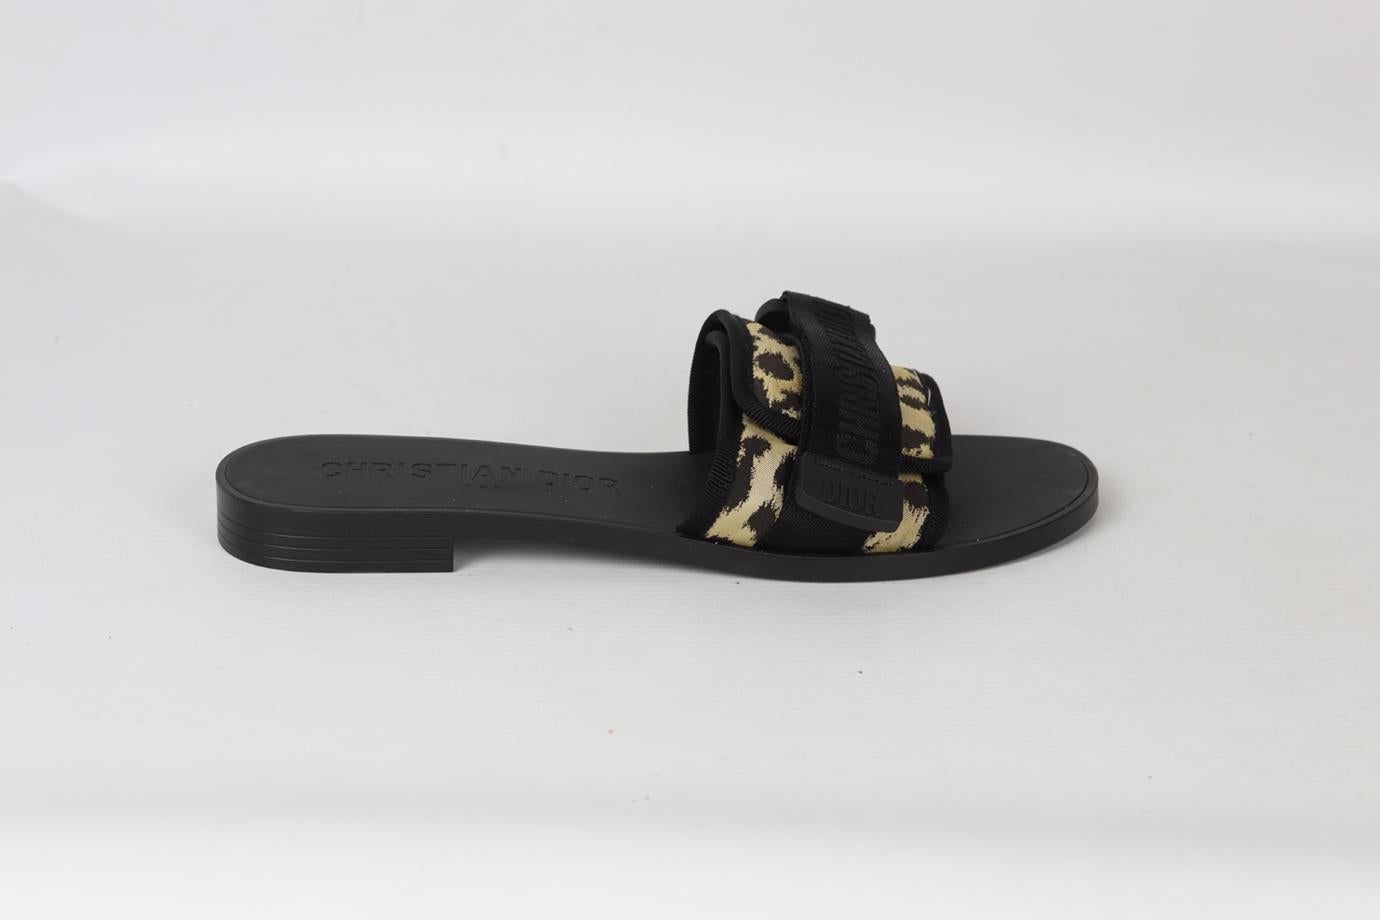 Christian Dior Dio(r)evolution leopard jacquard satin slides. Black, beige and brown. Slip on. Does not come with dustbag or box. Size: EU 38 (UK 5, US 8). Insole: 9.6 in. Heel Height: 0.6 in. New without box